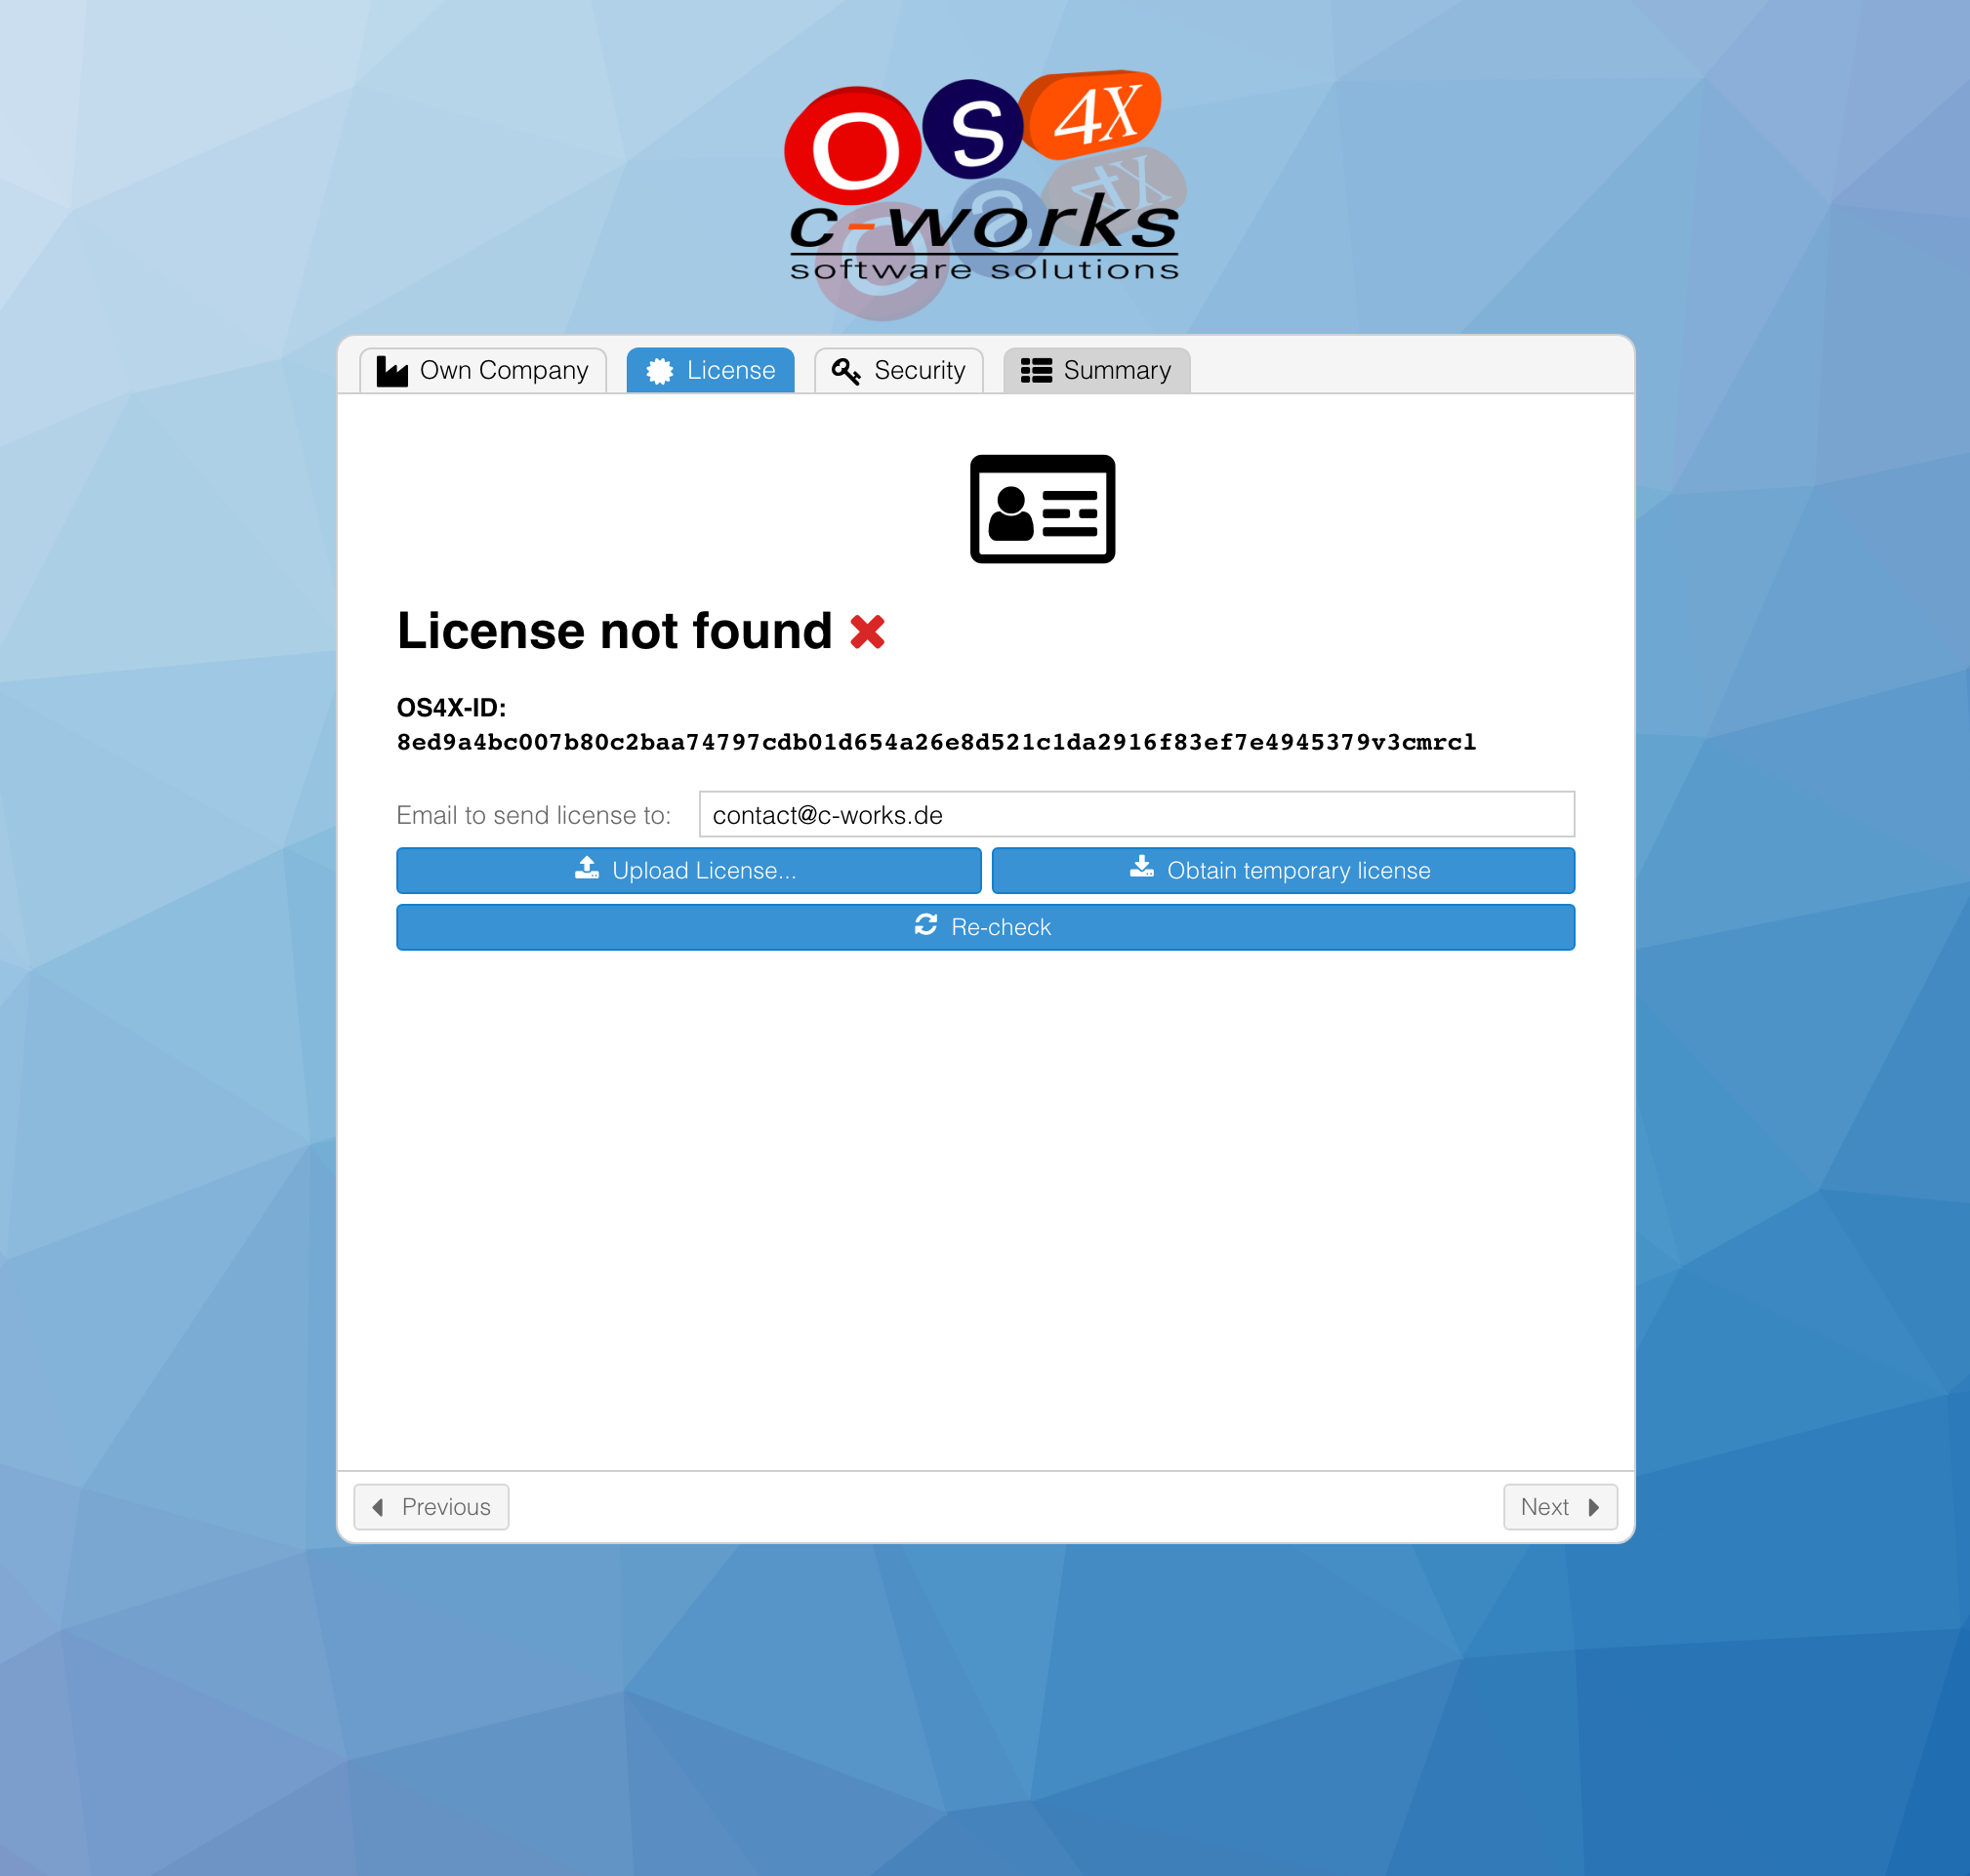 License is unavailable, multiple options can be used